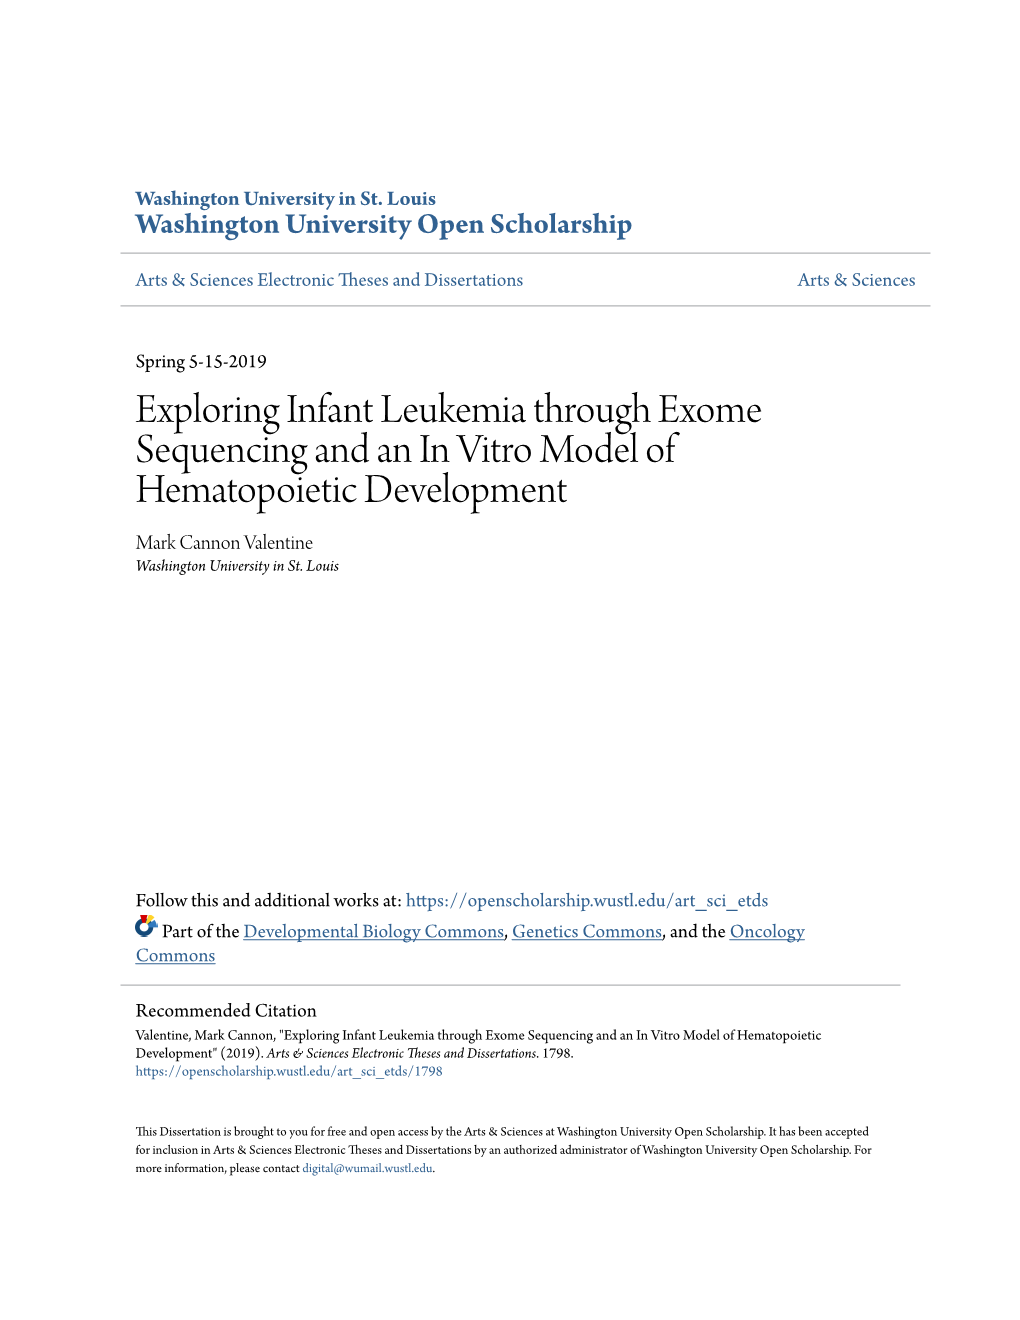 Exploring Infant Leukemia Through Exome Sequencing and an in Vitro Model of Hematopoietic Development Mark Cannon Valentine Washington University in St